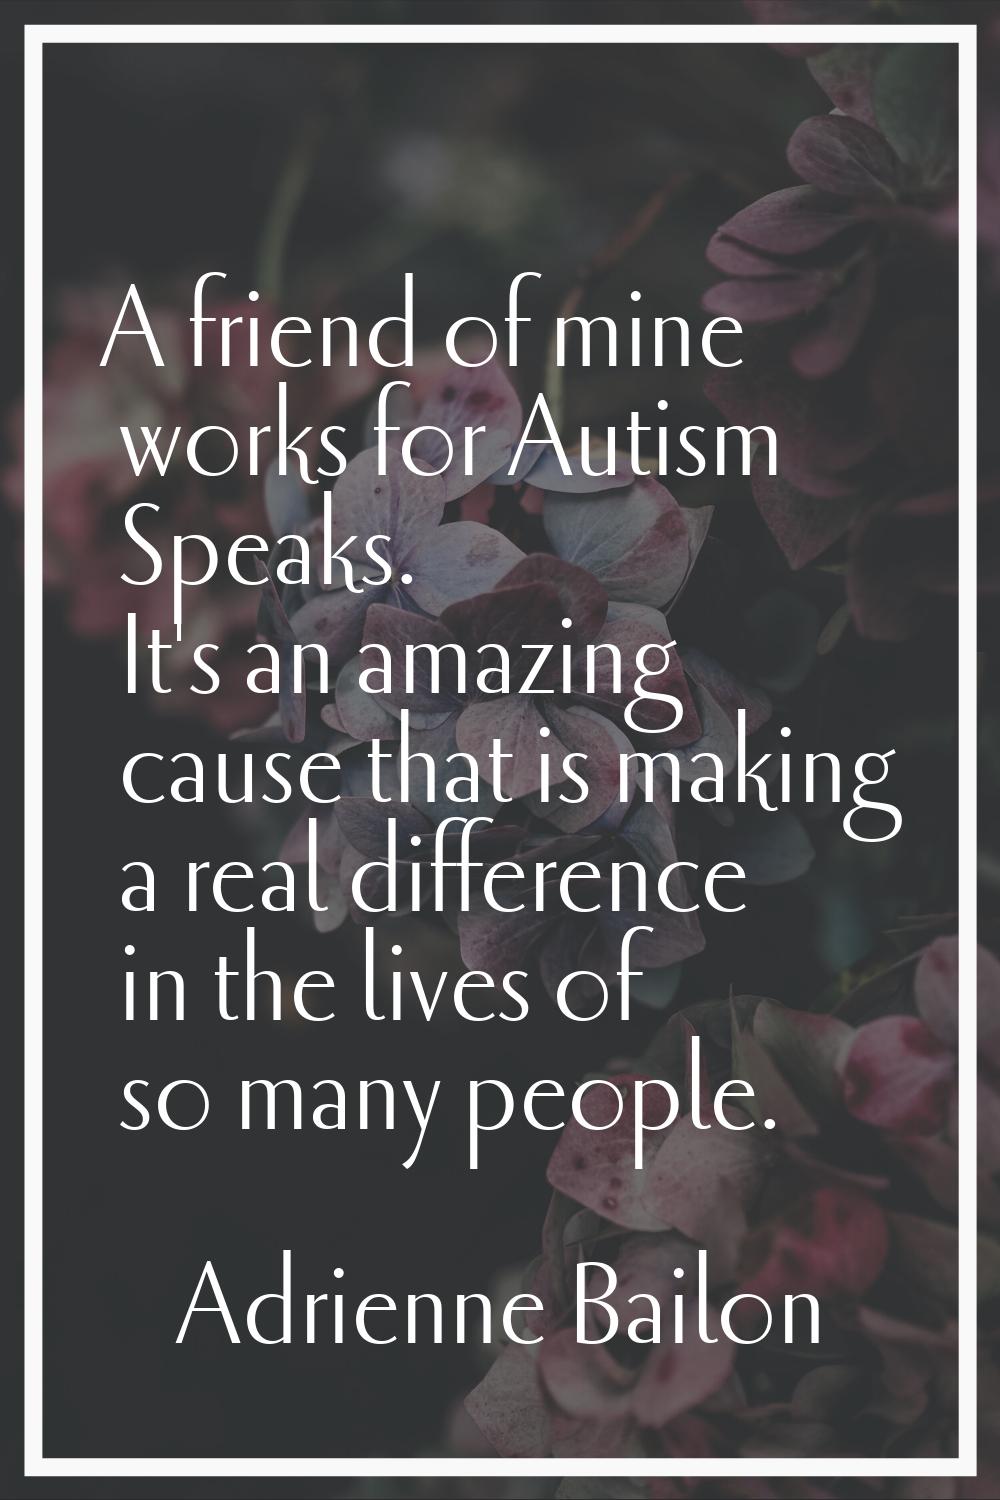 A friend of mine works for Autism Speaks. It's an amazing cause that is making a real difference in